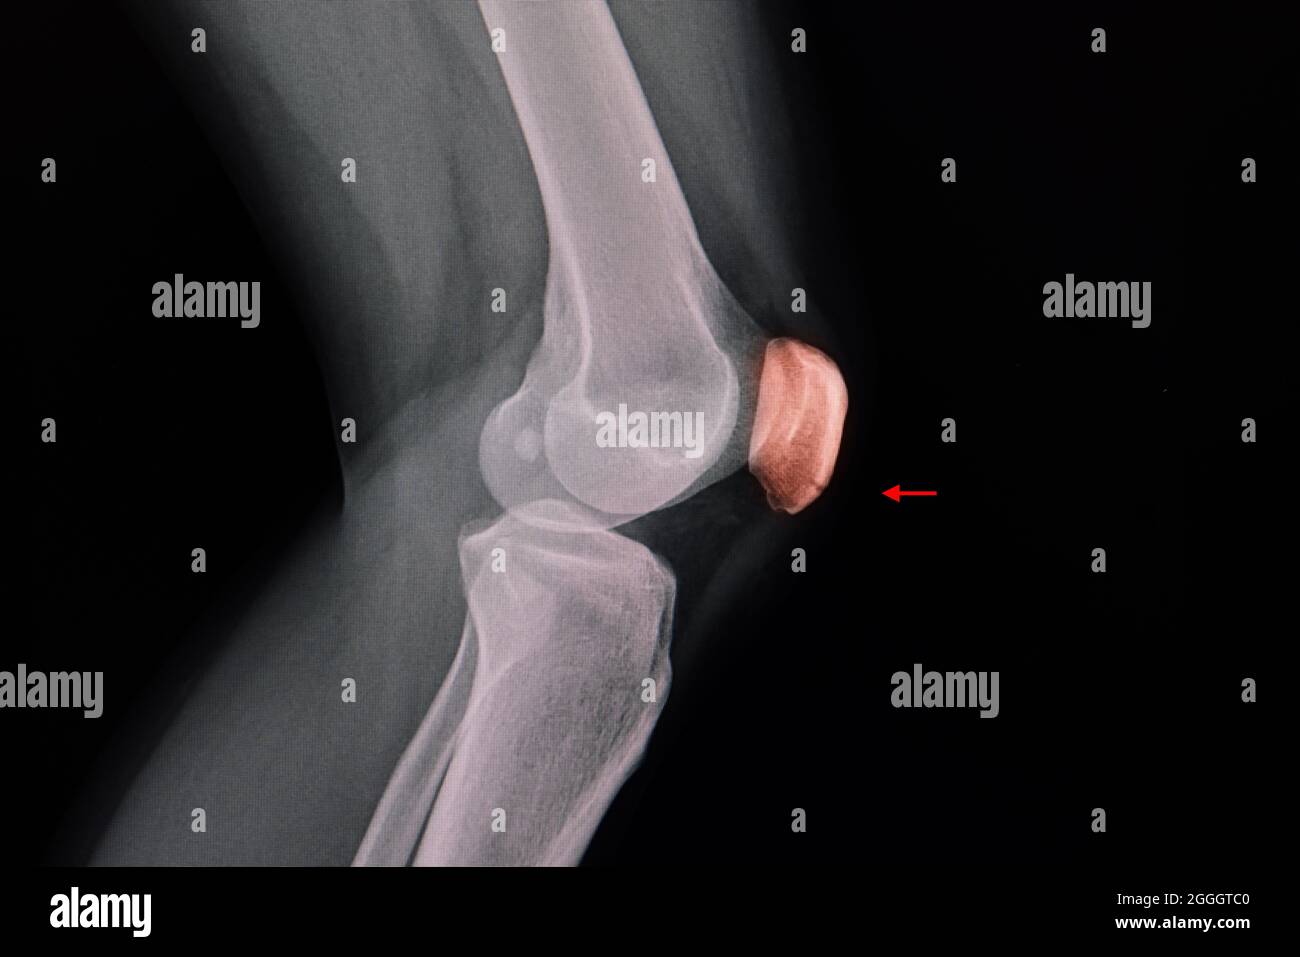 Knee xray of a patient showing a lucent line at lower part of the patella with linear non-displaced fracture of the patella and left knee effusion. Stock Photo